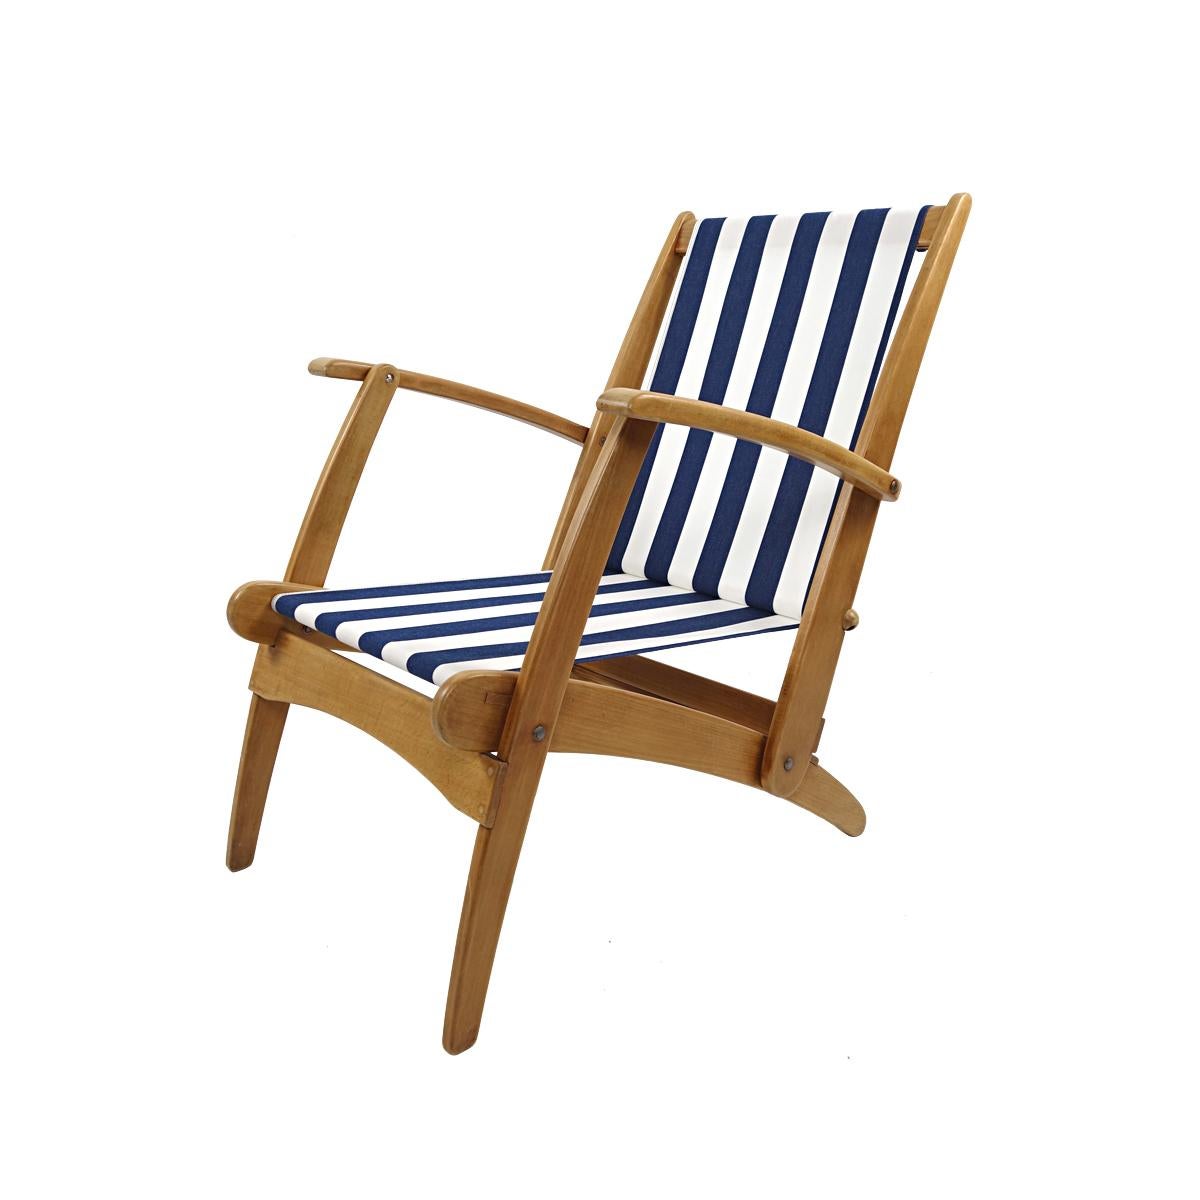 20th Century Mid-Century Modern Set of 2 Lacquered Wooden Folding Deck Chairs 'Gracias' For Sale